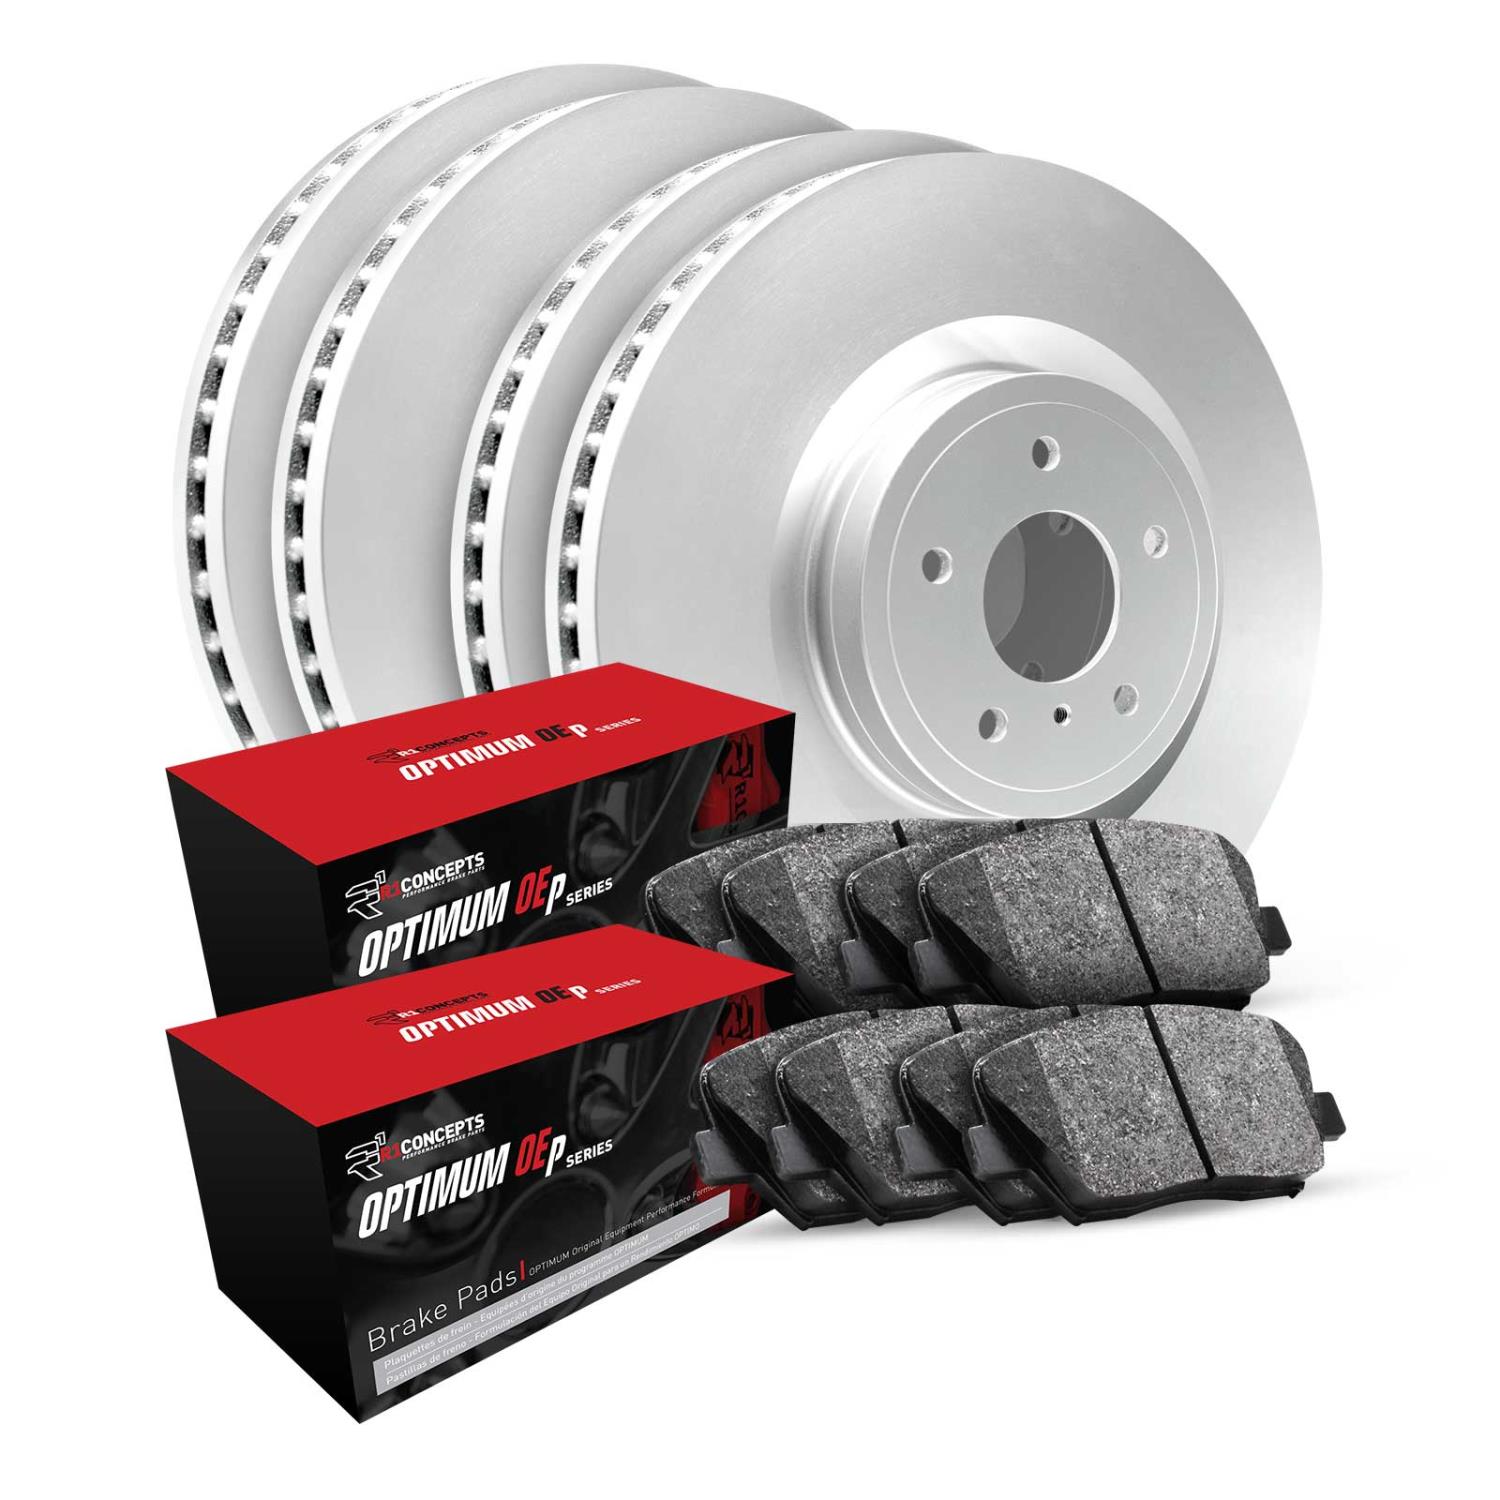 GEO-Carbon Brake Rotor & Drum Set w/Optimum OE Pads & Shoes, 2003-2008 Fits Multiple Makes/Models, Position: Front & Rear